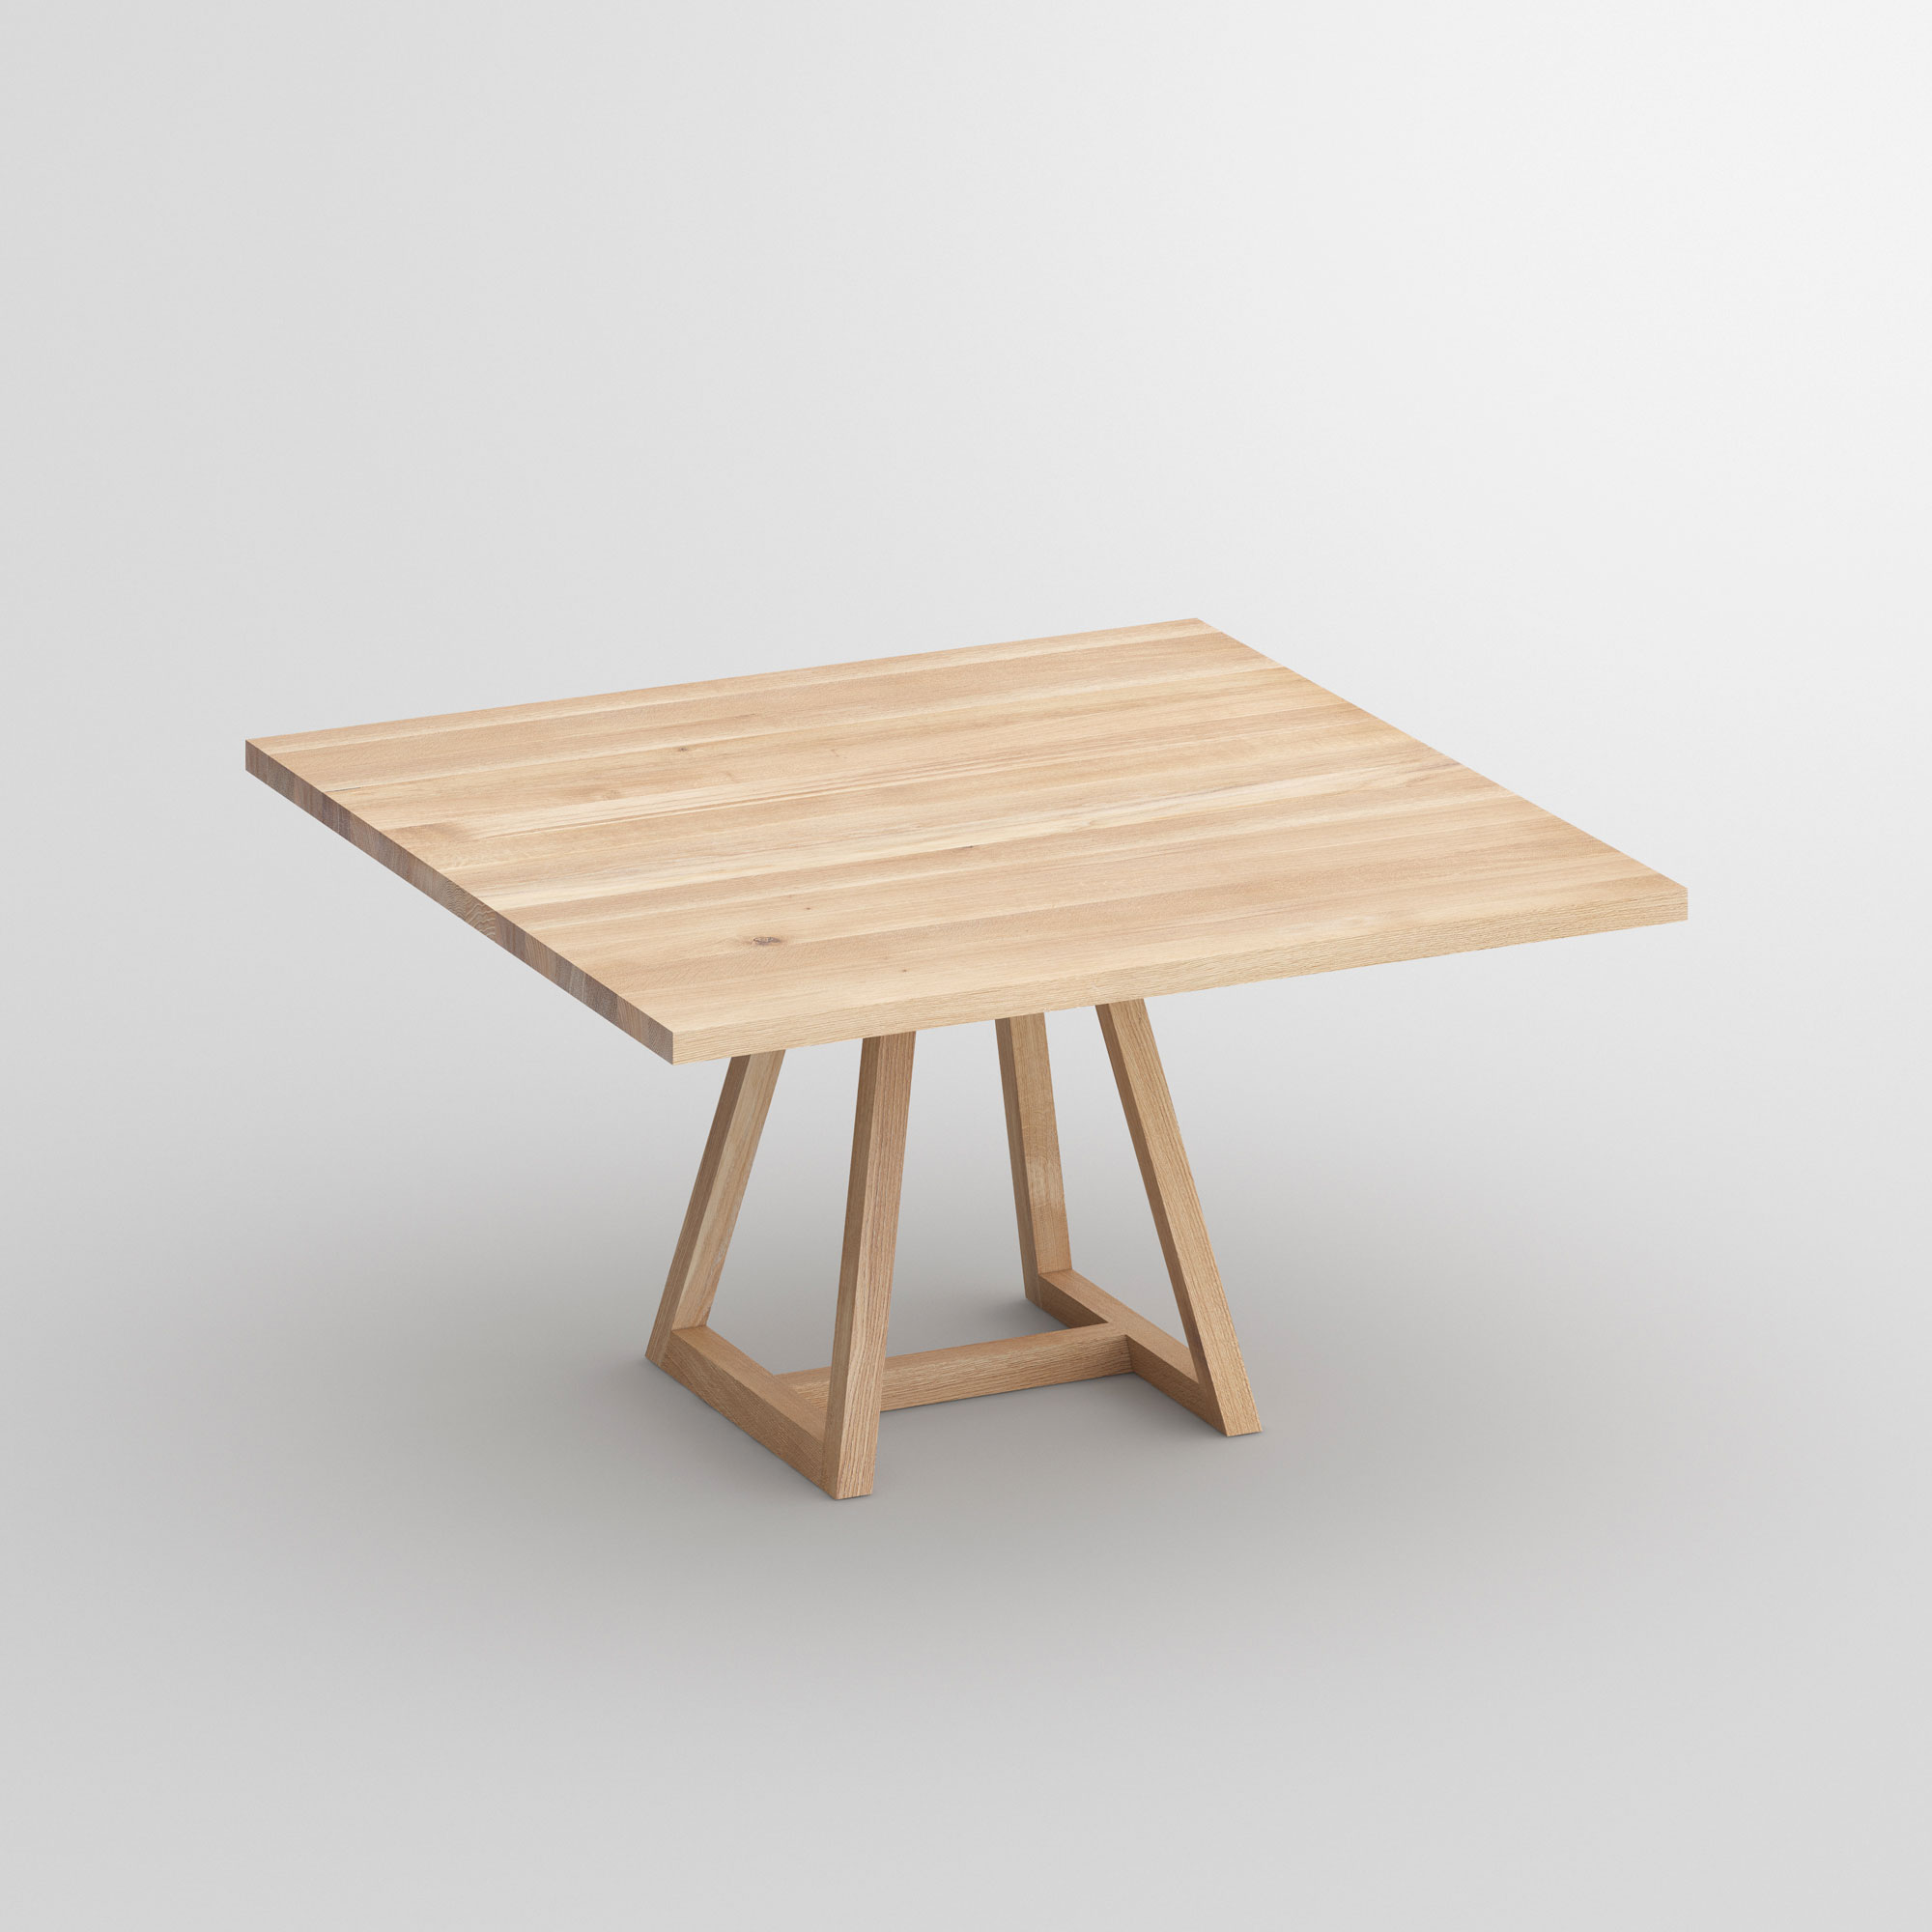 Square Table MARGO SQUARE cam1 custom made in solid wood by vitamin design